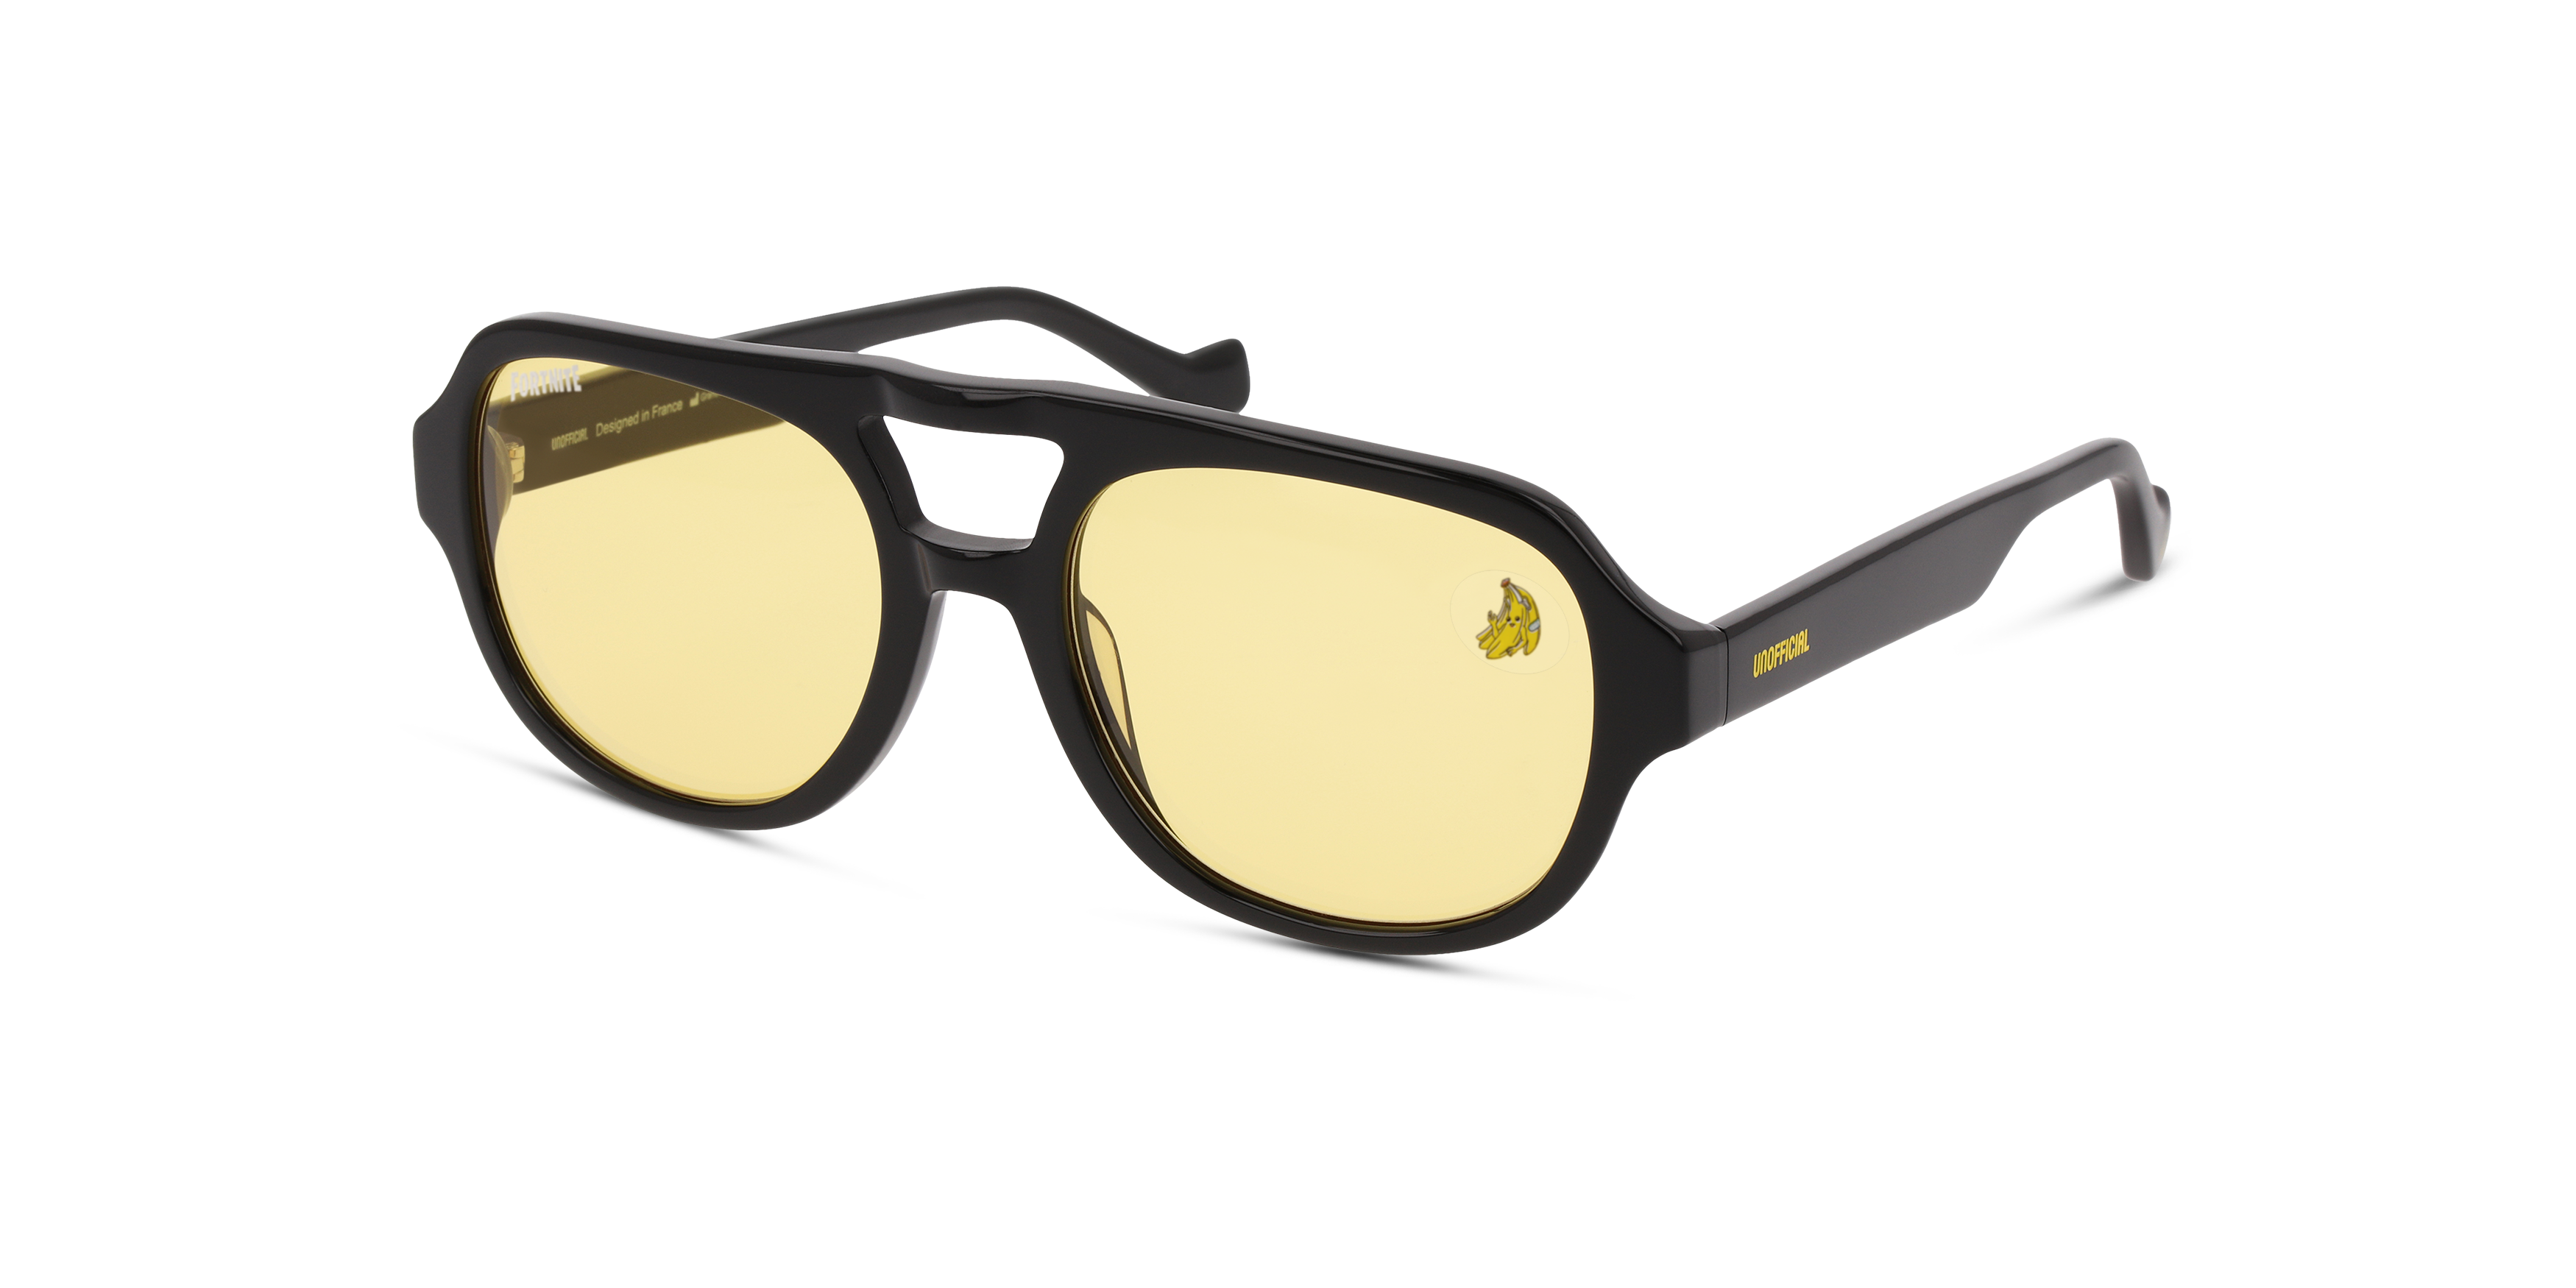 Angle_Left01 Fortnite with Unofficial UNSU0126 Sunglasses Yellow / Black